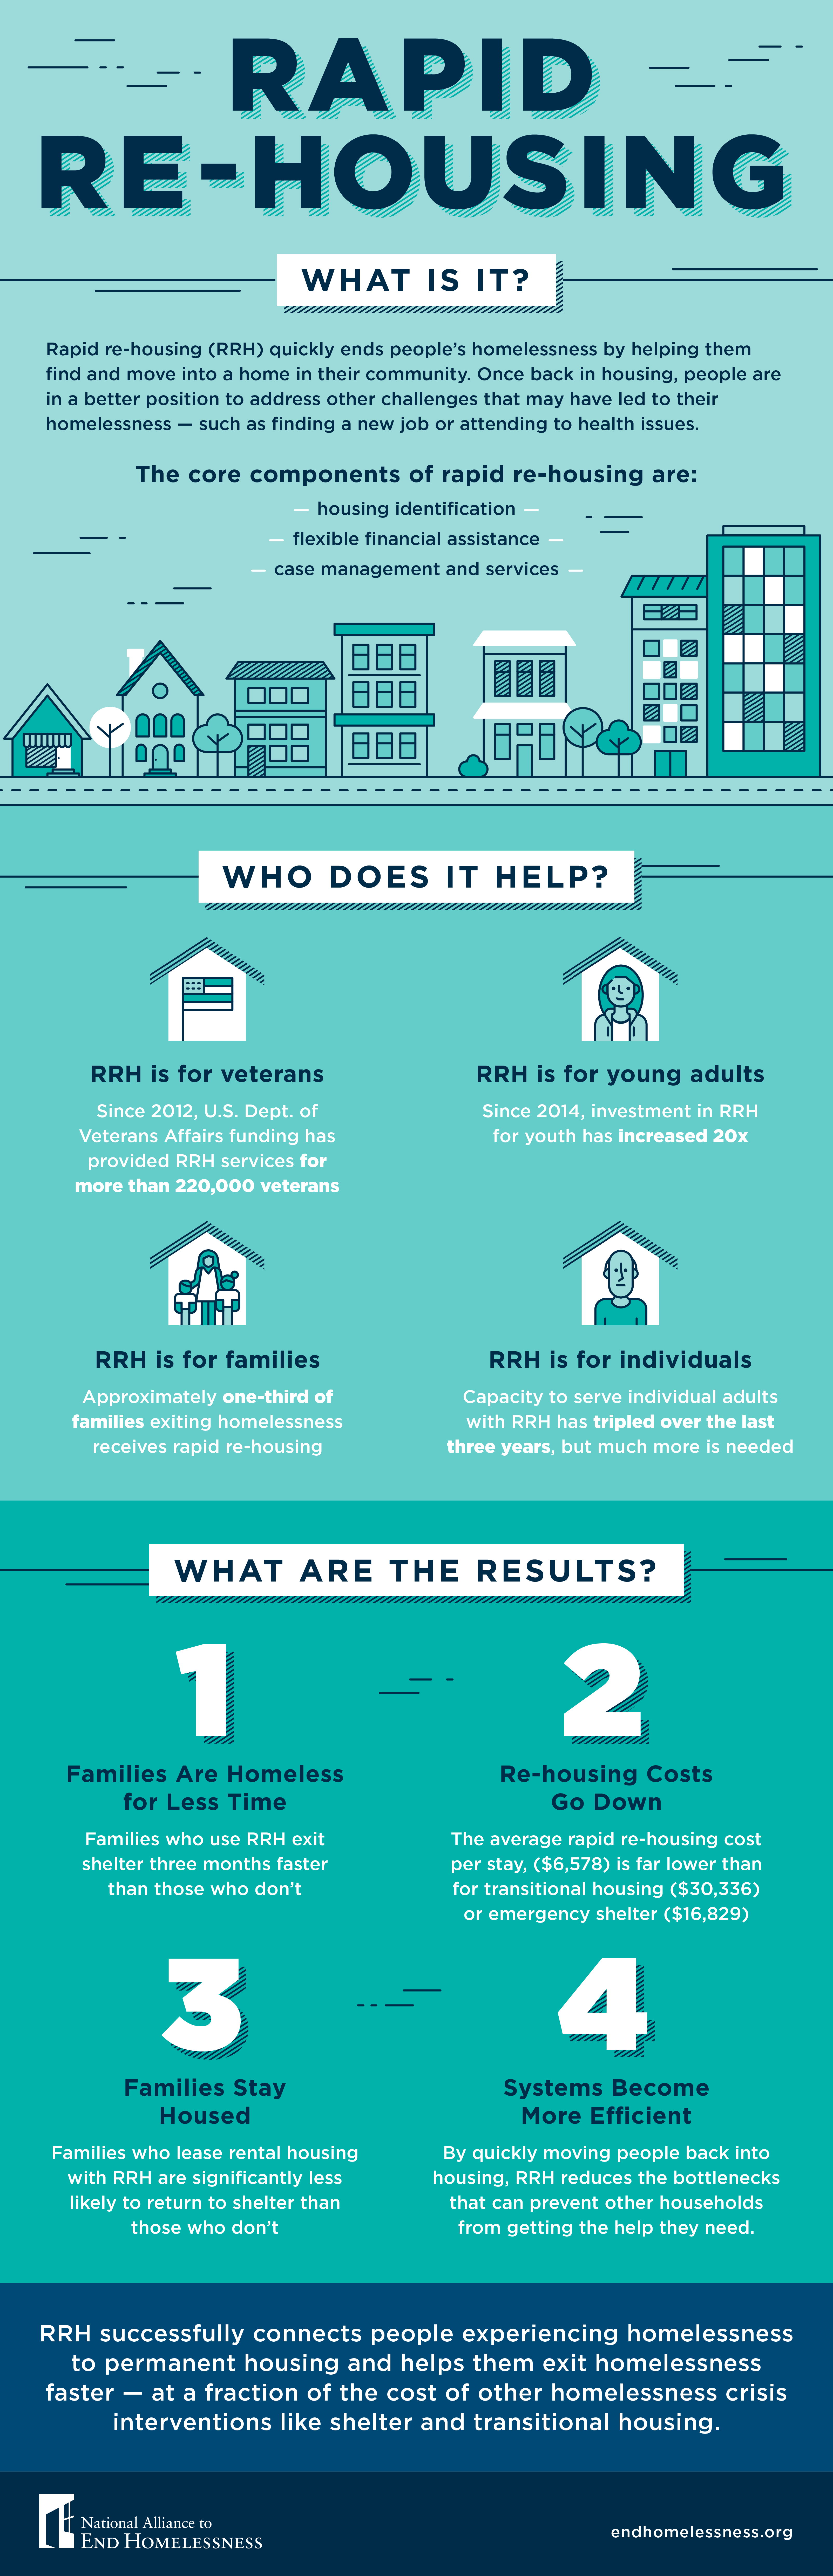 Rapid re-housing (RRH) quickly ends people’s homelessness by helping them find and move into a home in their community. Once back in housing, people are in a better position to address other challenges that may have led to their homelessness — such as finding a new job or attending to health issues. 